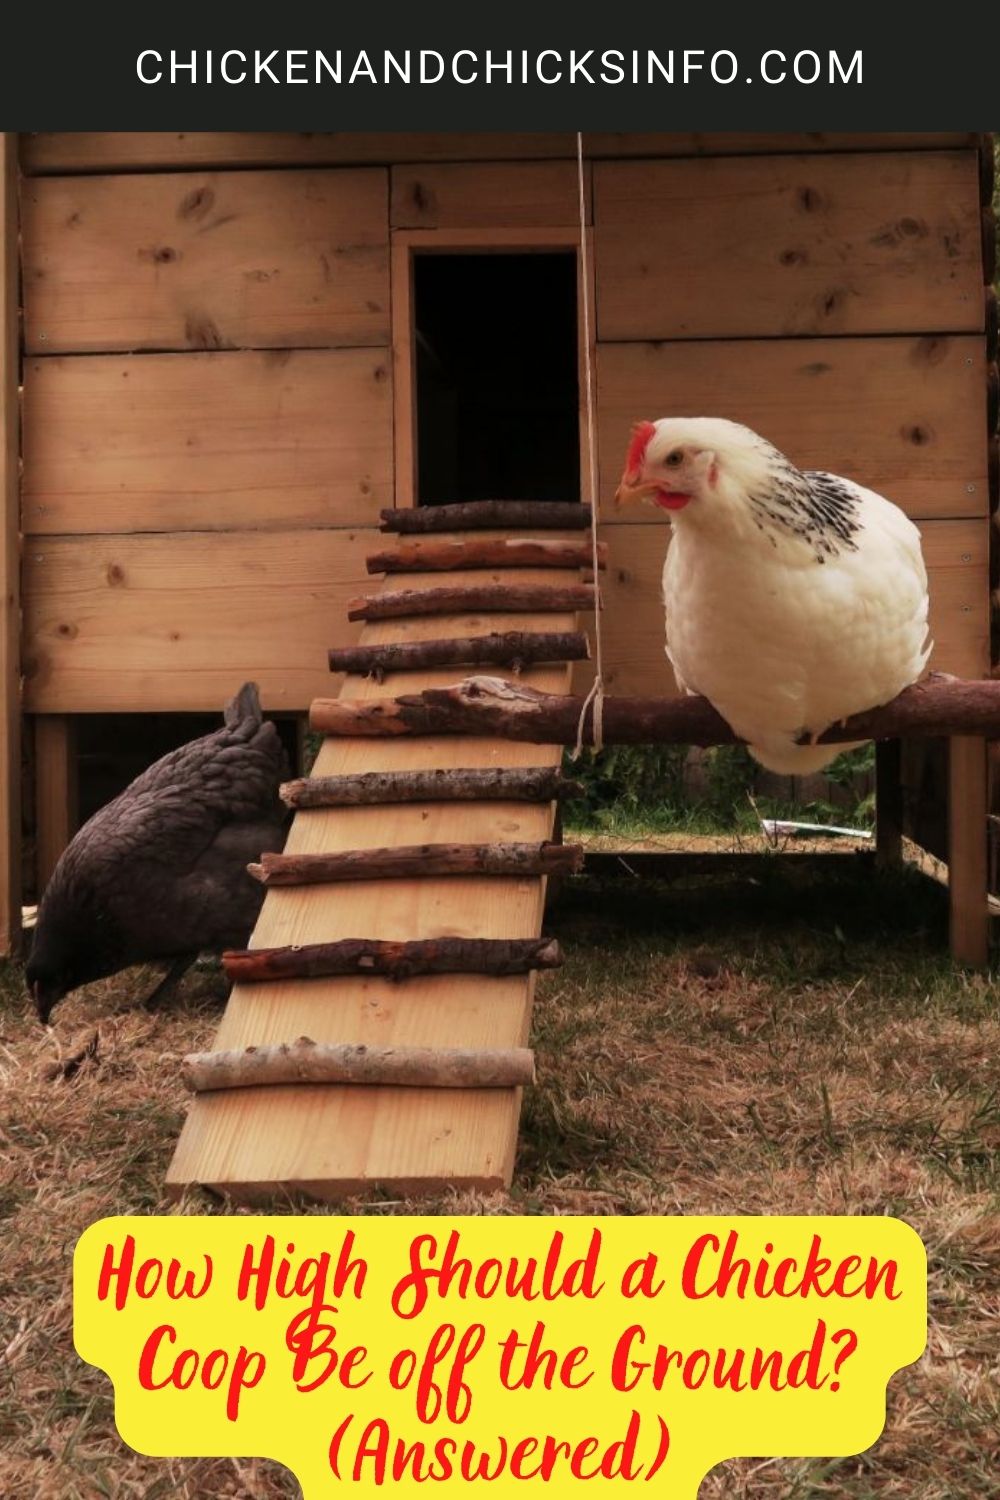 How High Should a Chicken Coop Be off the Ground? (Answered) poster.